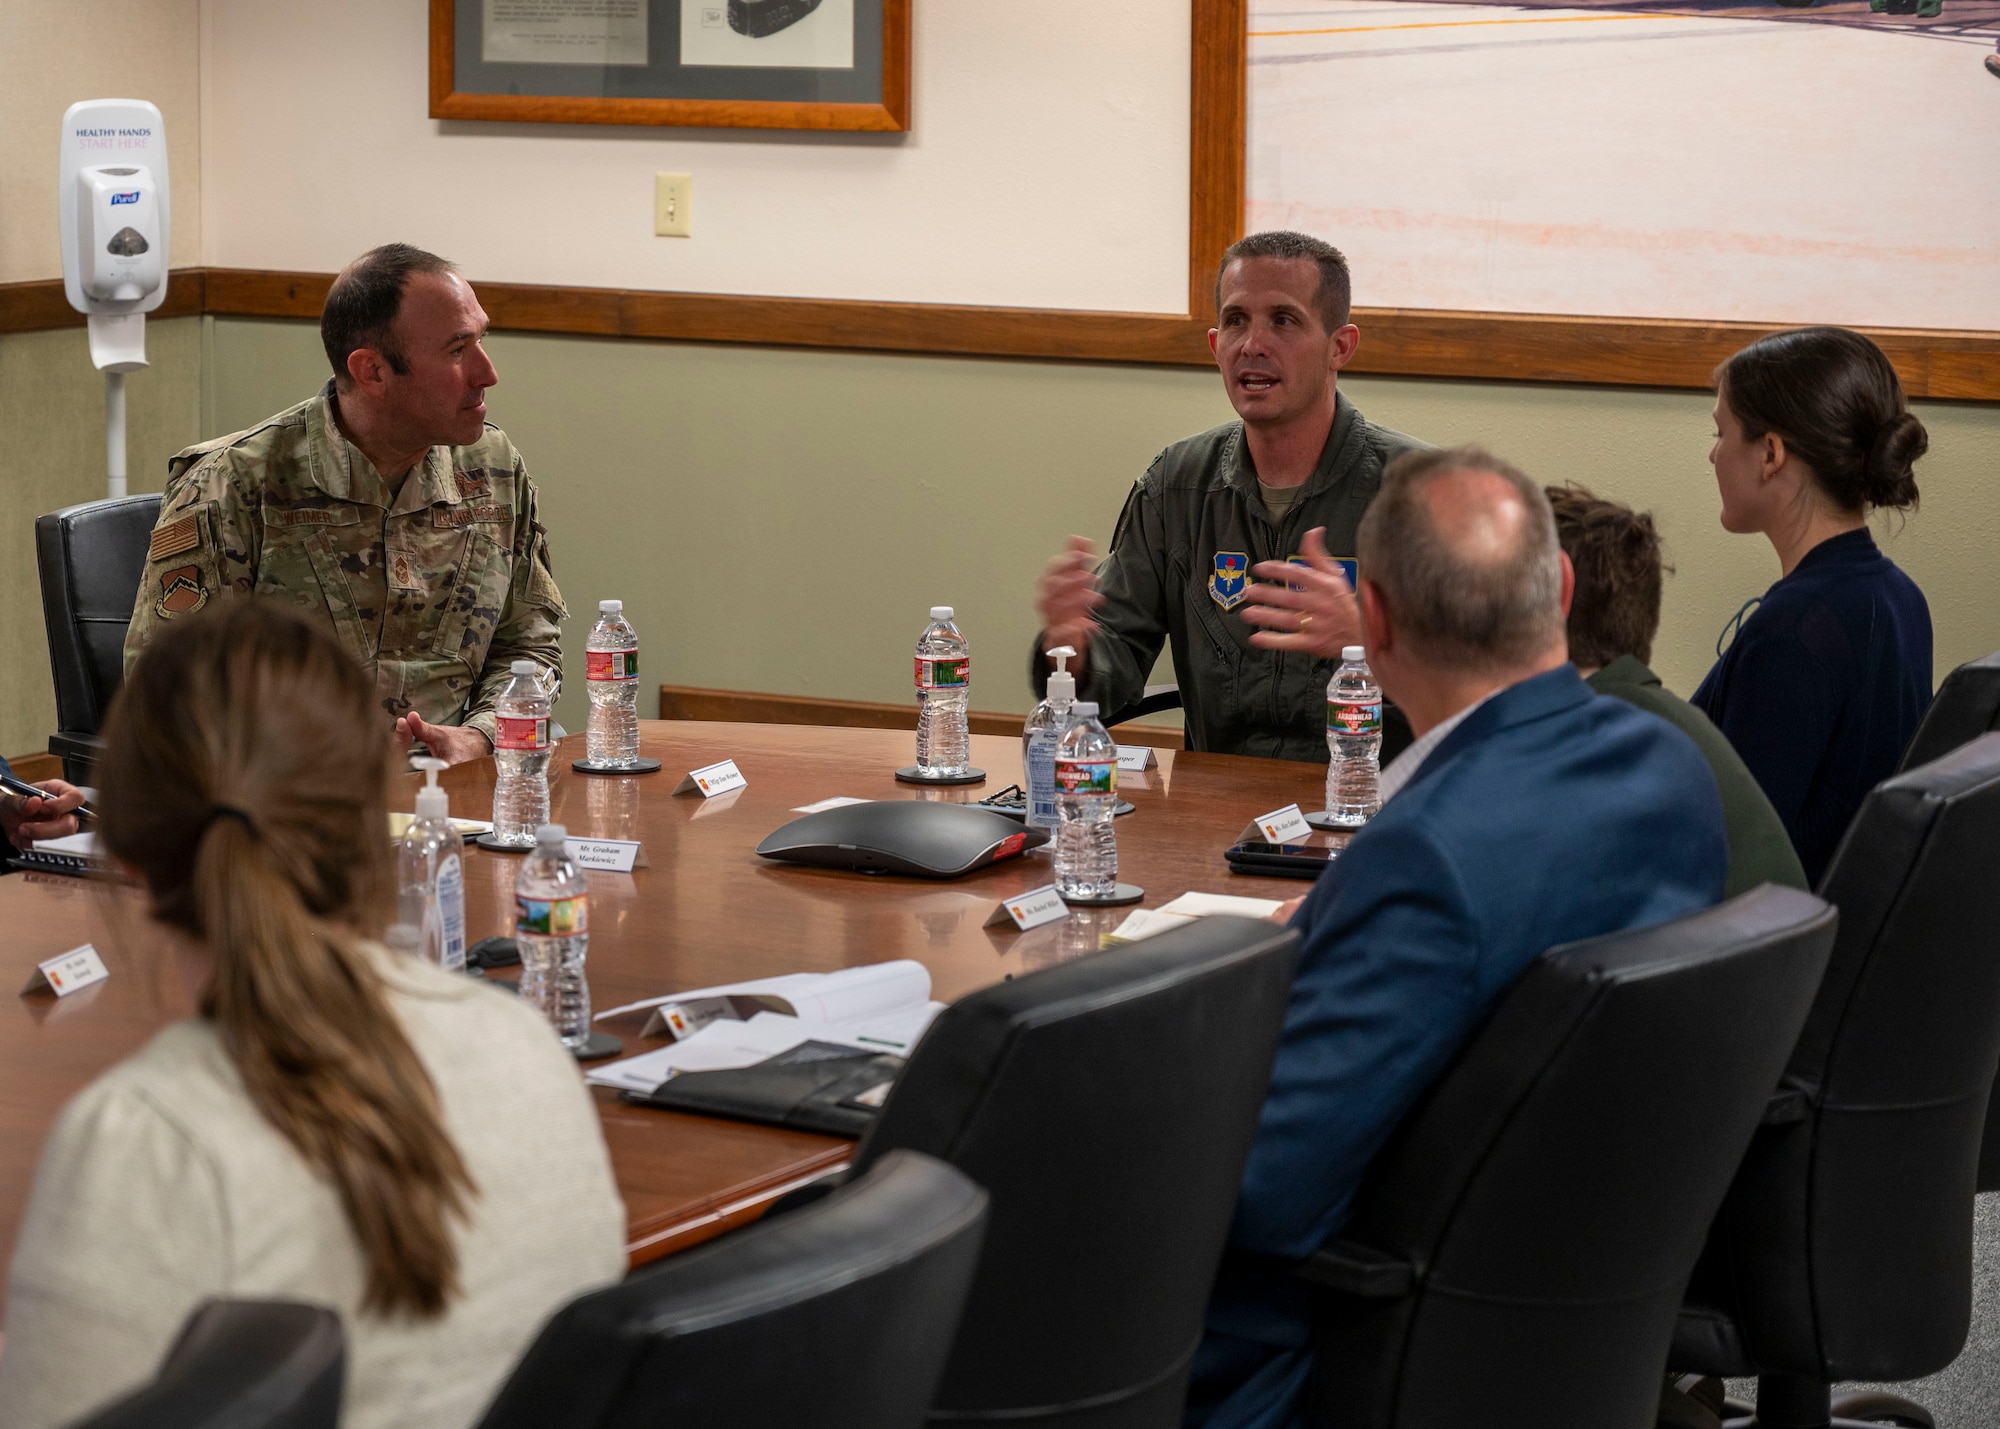 Members from the Arizona Congressional Staff Delegation receive a mission brief from the 56th Fighter Wing leadership during a visit, May 5, 2022, at Luke Air Force Base, Arizona.